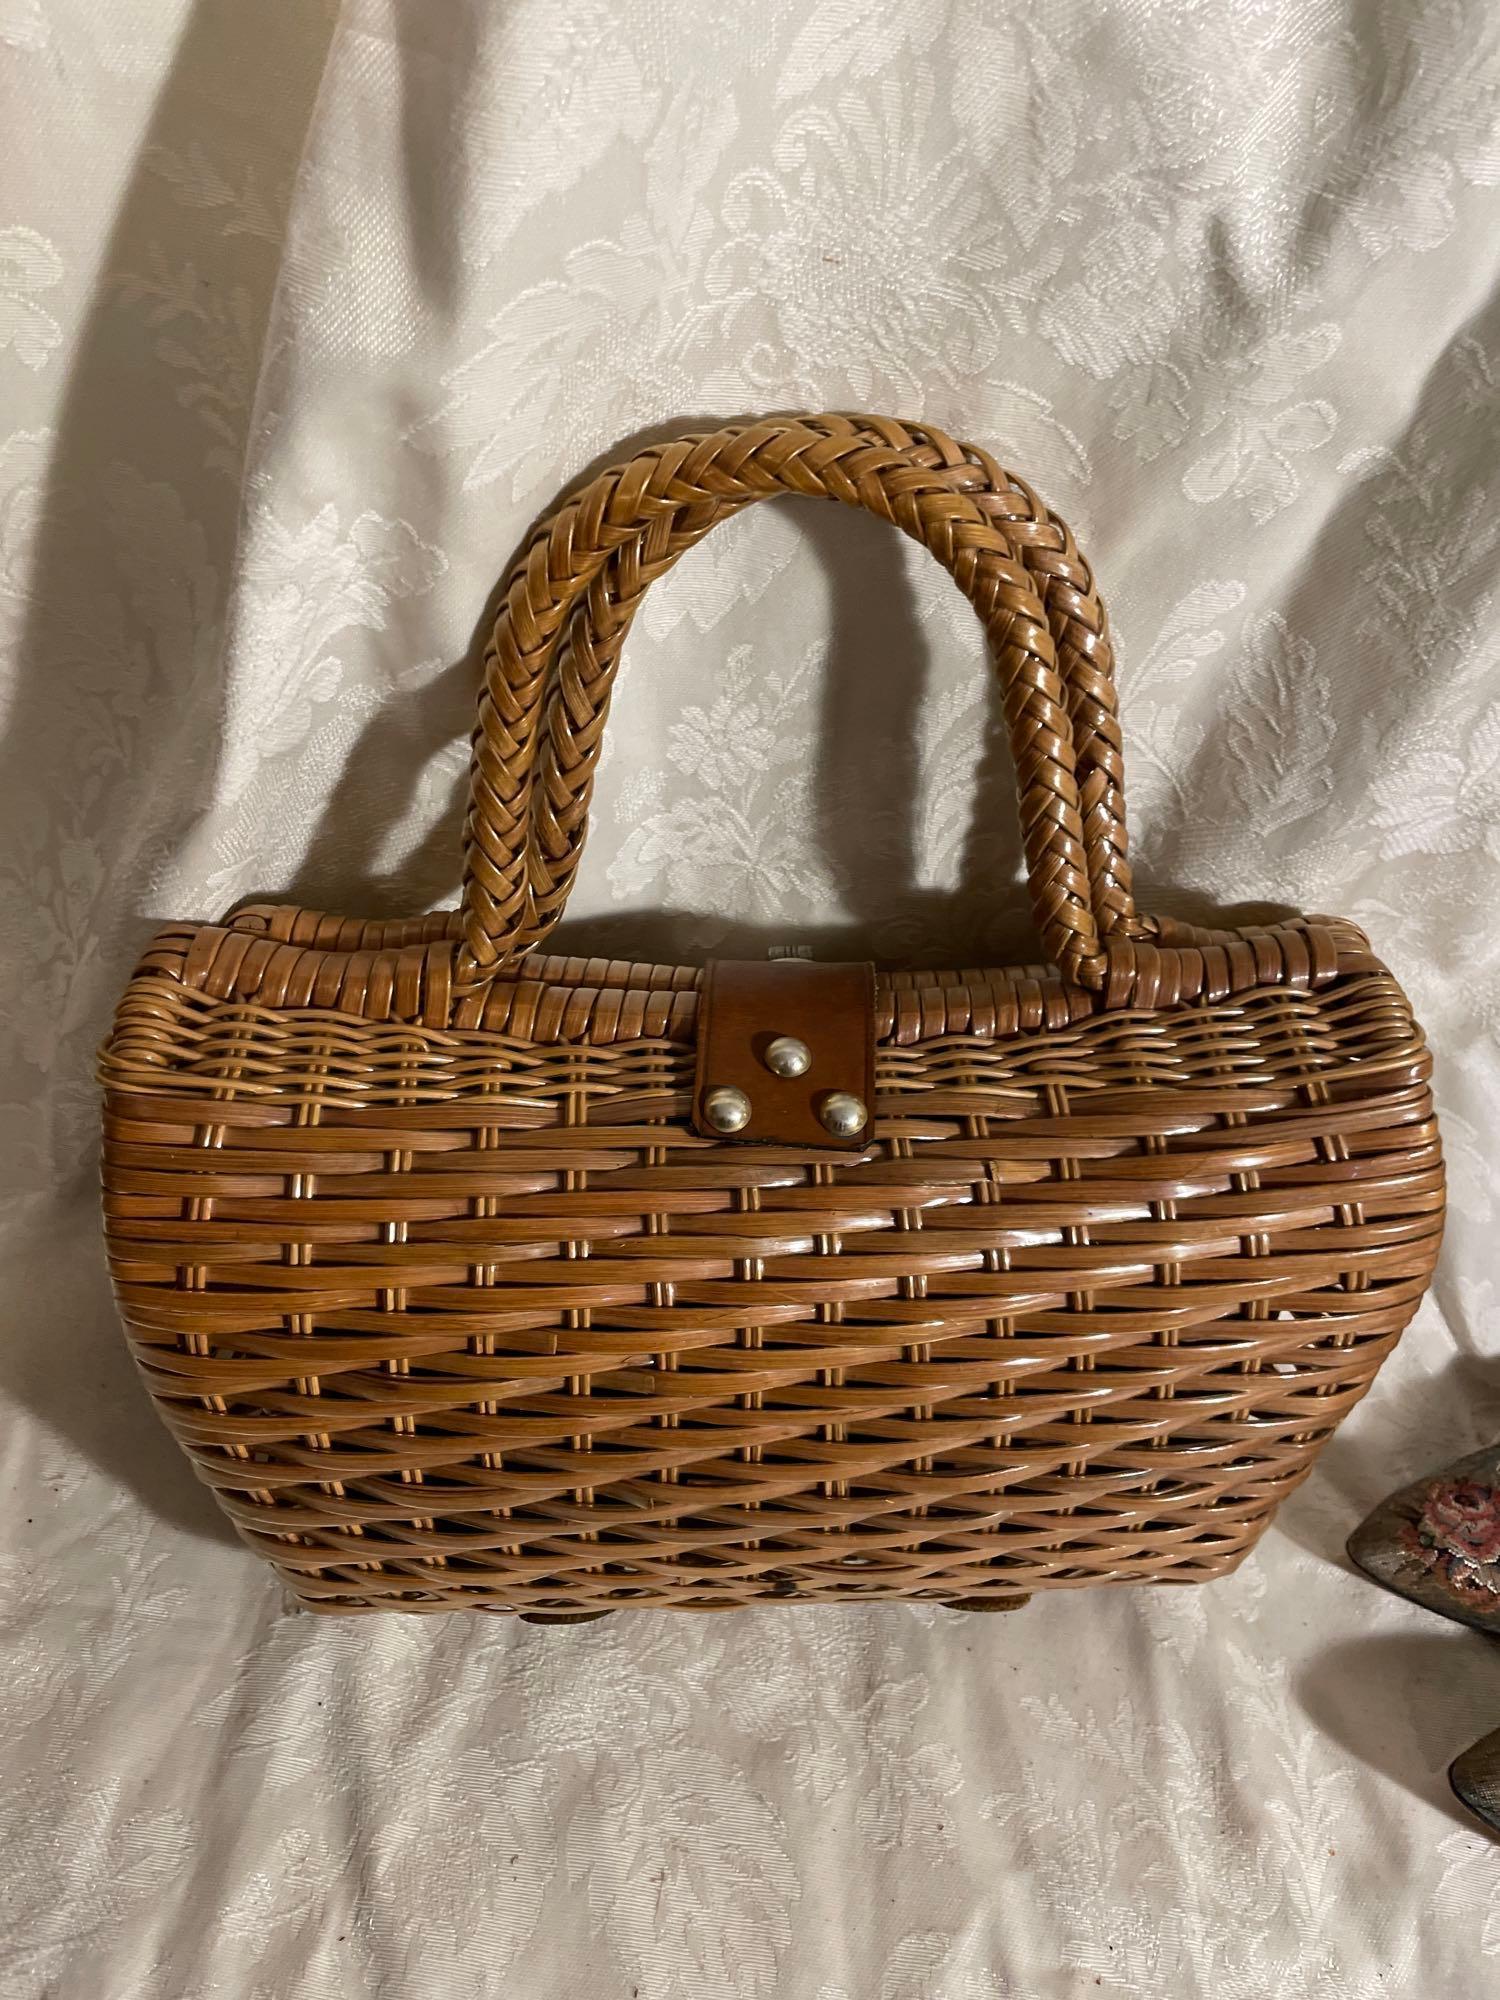 Vintage Woven Purse and Heels